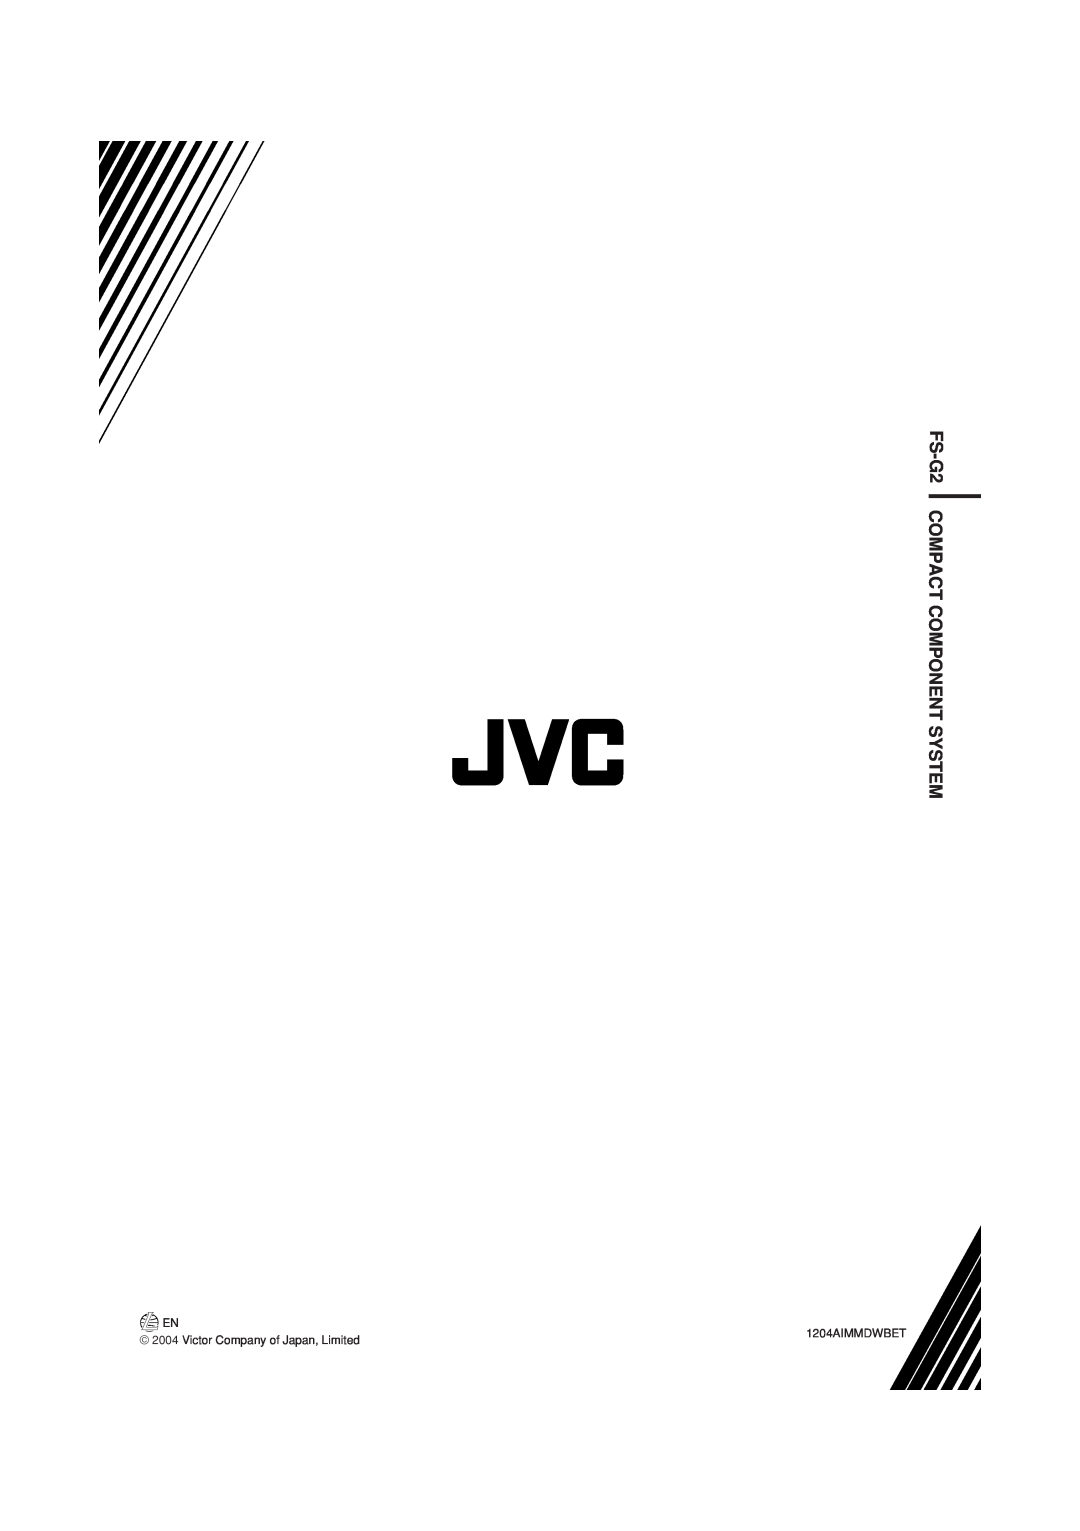 JVC manual FS-G2COMPACT COMPONENT SYSTEM, EN 2004 Victor Company of Japan, Limited, 1204AIMMDWBET 